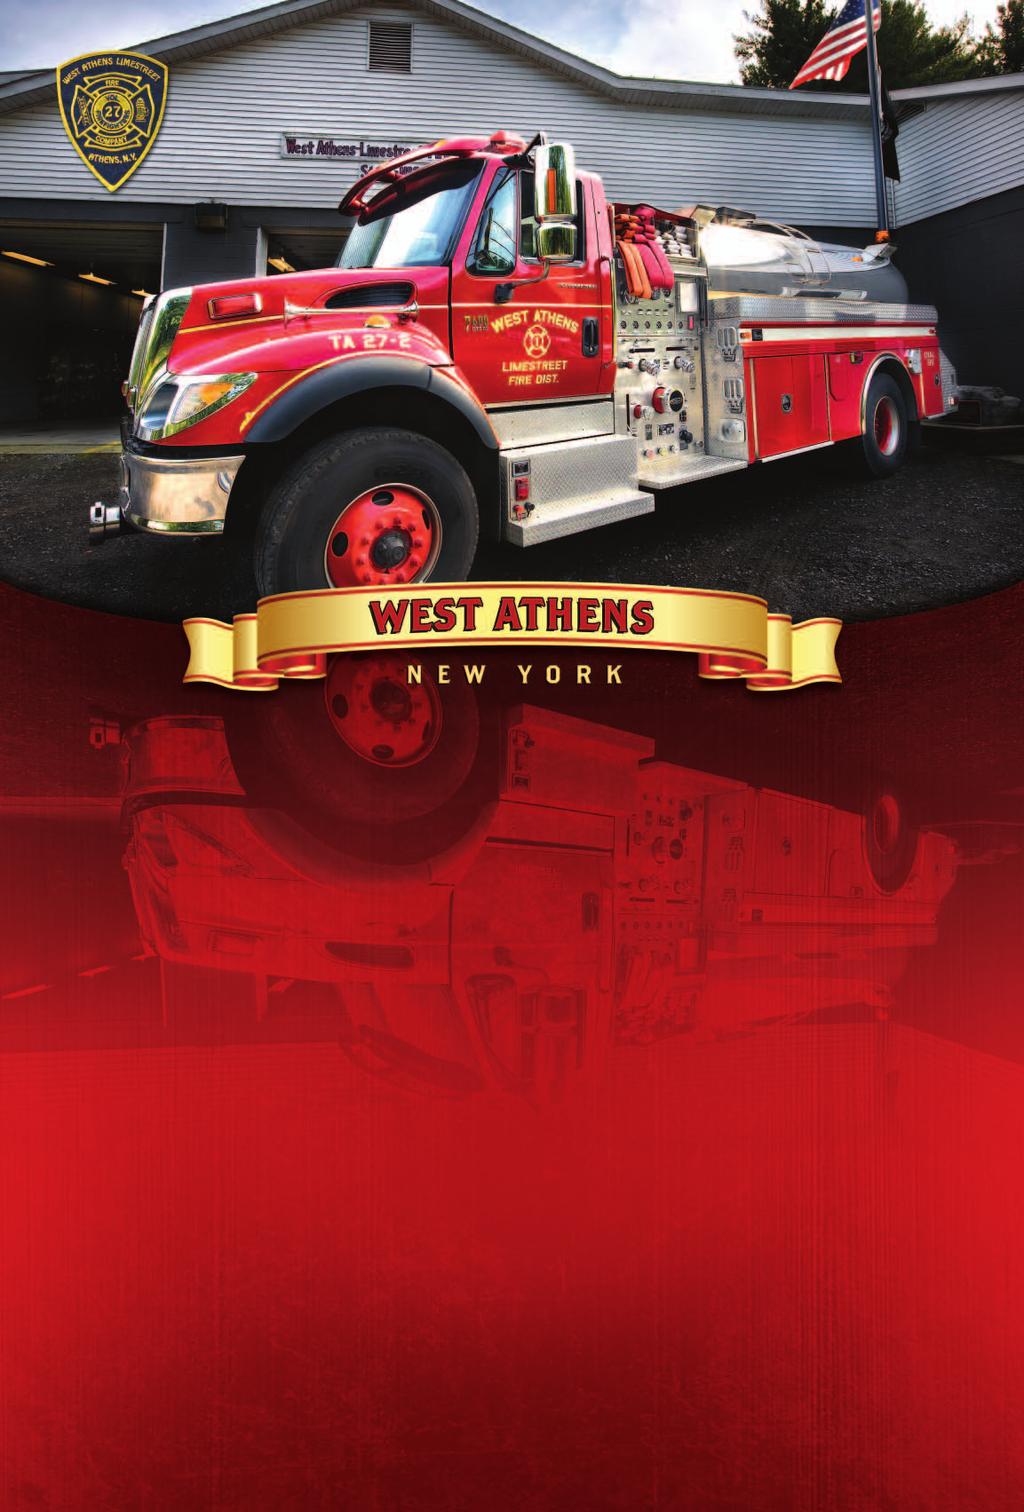 West Athens Limestreet Volunteer Fire Company Proudly Serving the Athens Community Since 1952 JULY 1 Canada Day 2 3 Full Moon 4 Independence Day 5 6 7 8 9 10 11 Last Quarter Moon 12 13 14 15 16 17 18